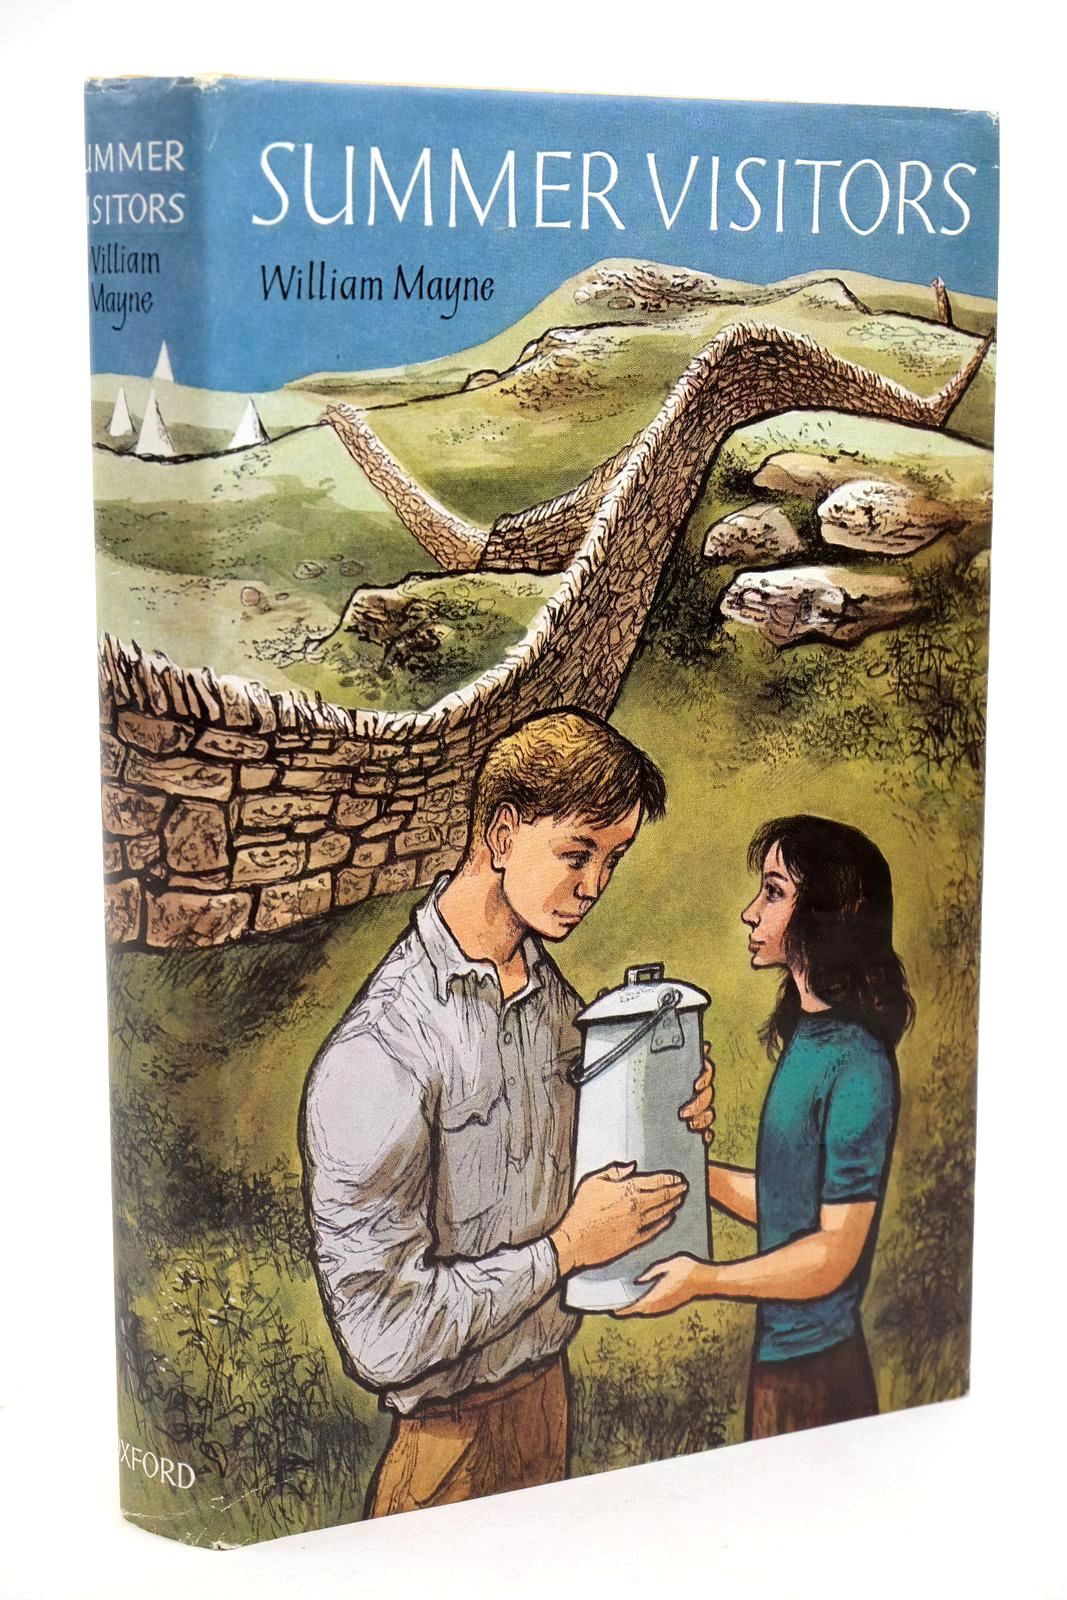 Photo of SUMMER VISITORS written by Mayne, William illustrated by Stobbs, William published by Oxford University Press (STOCK CODE: 1323100)  for sale by Stella & Rose's Books